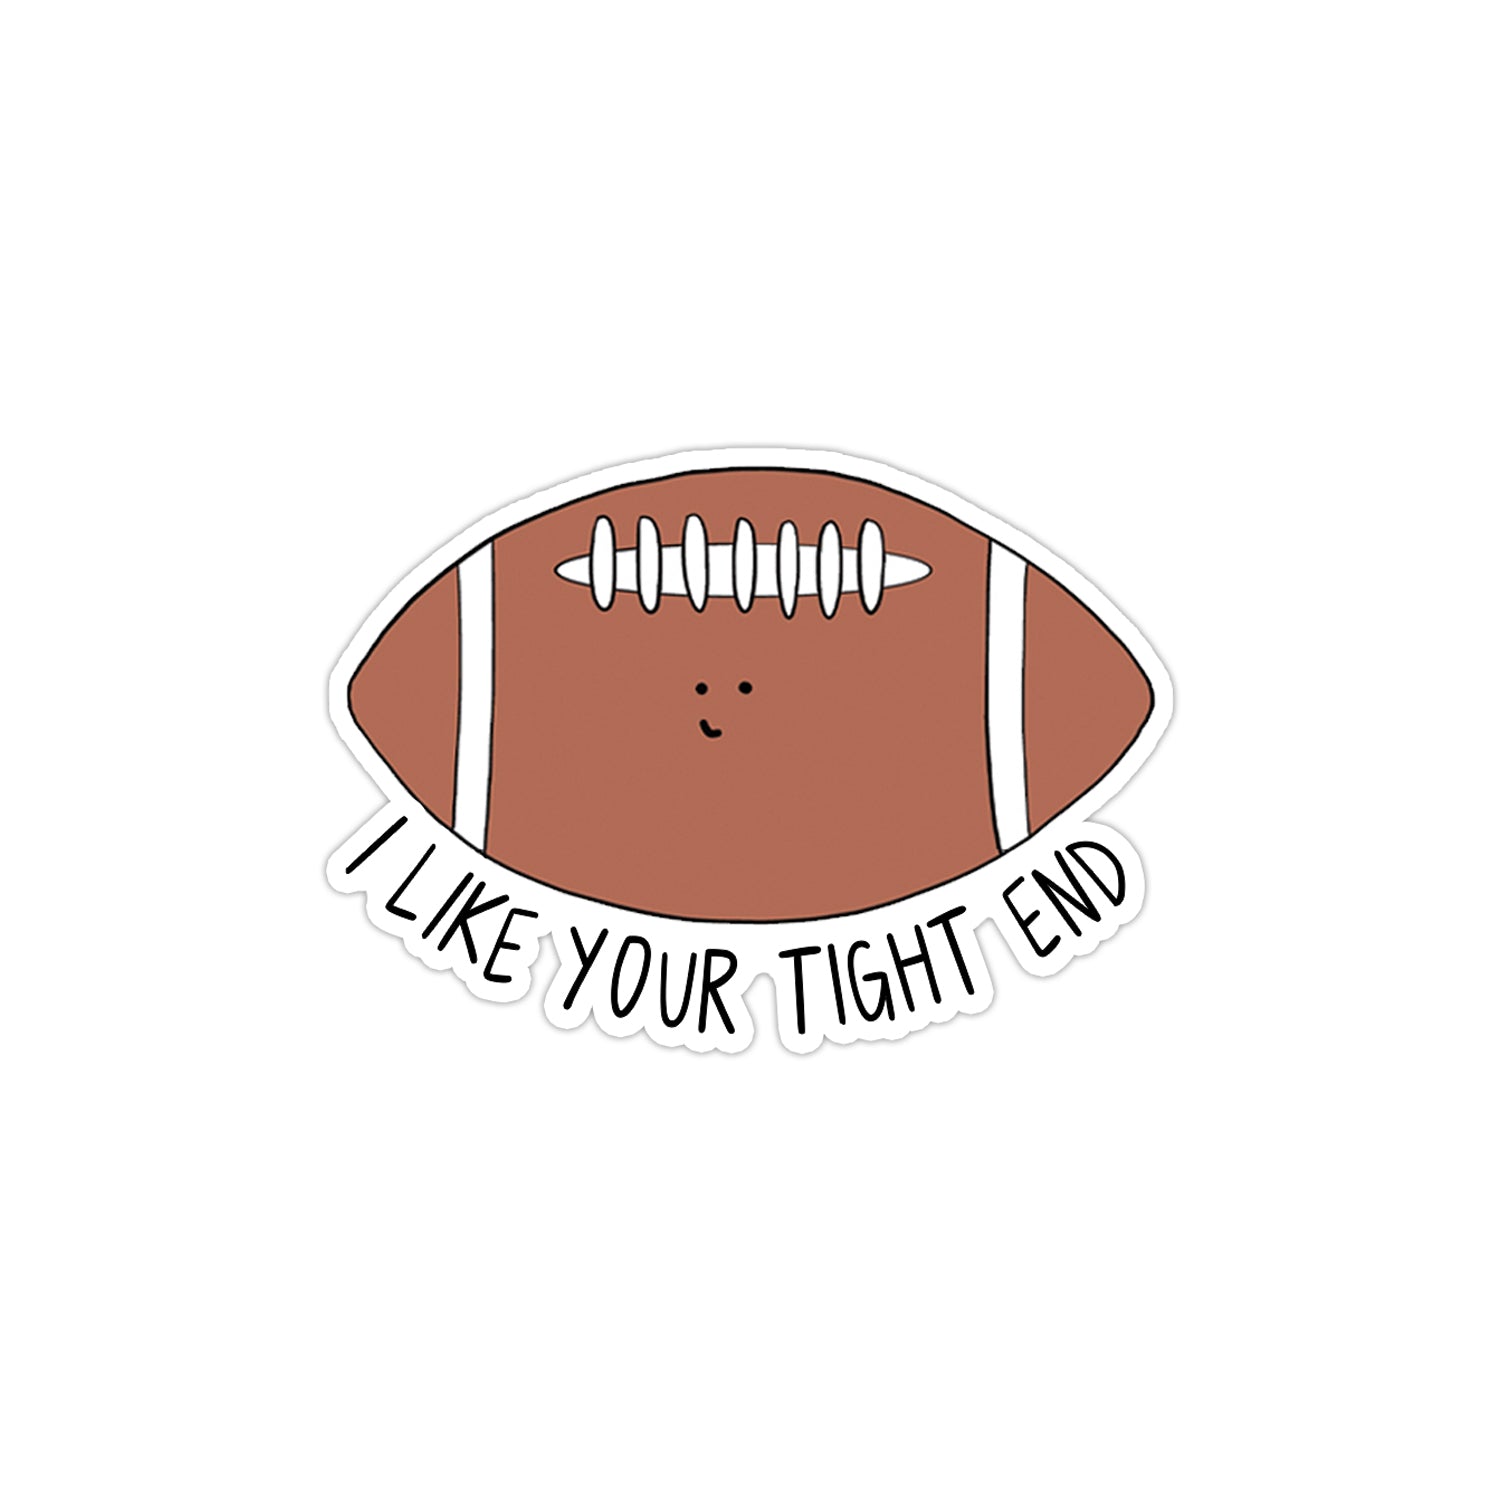 I like your "rockdoodles' I Like Your Tight End Sticker" die cut sticker.